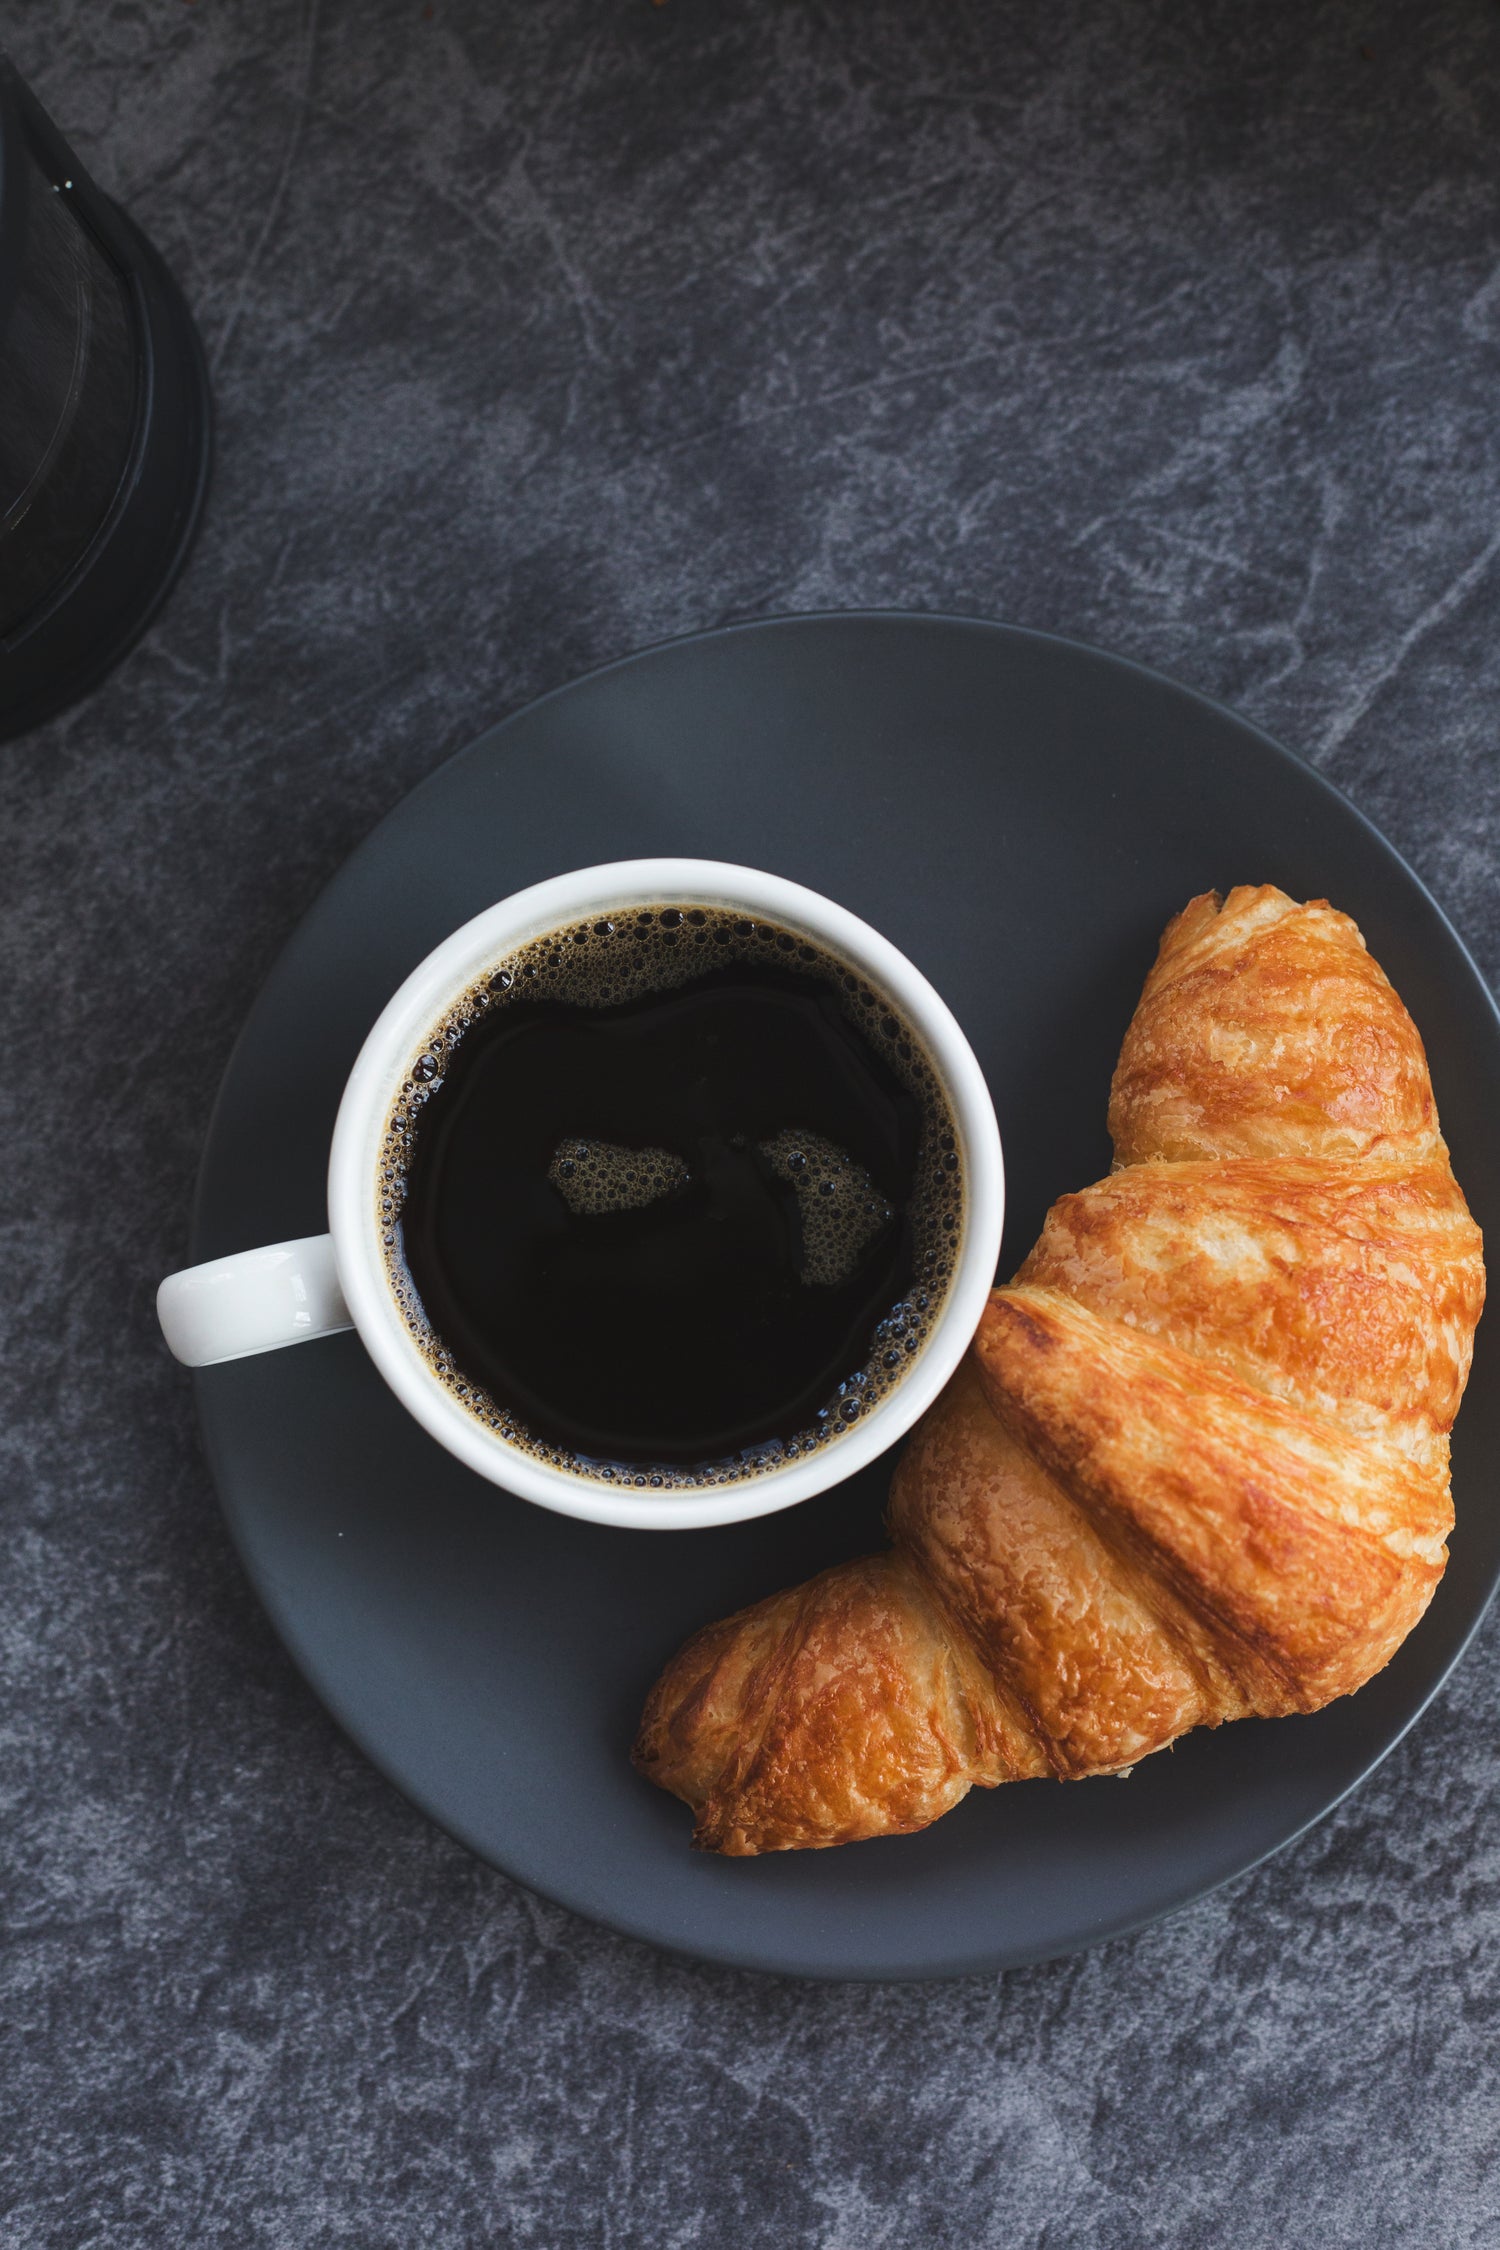 cup of coffee and crossiant on plate